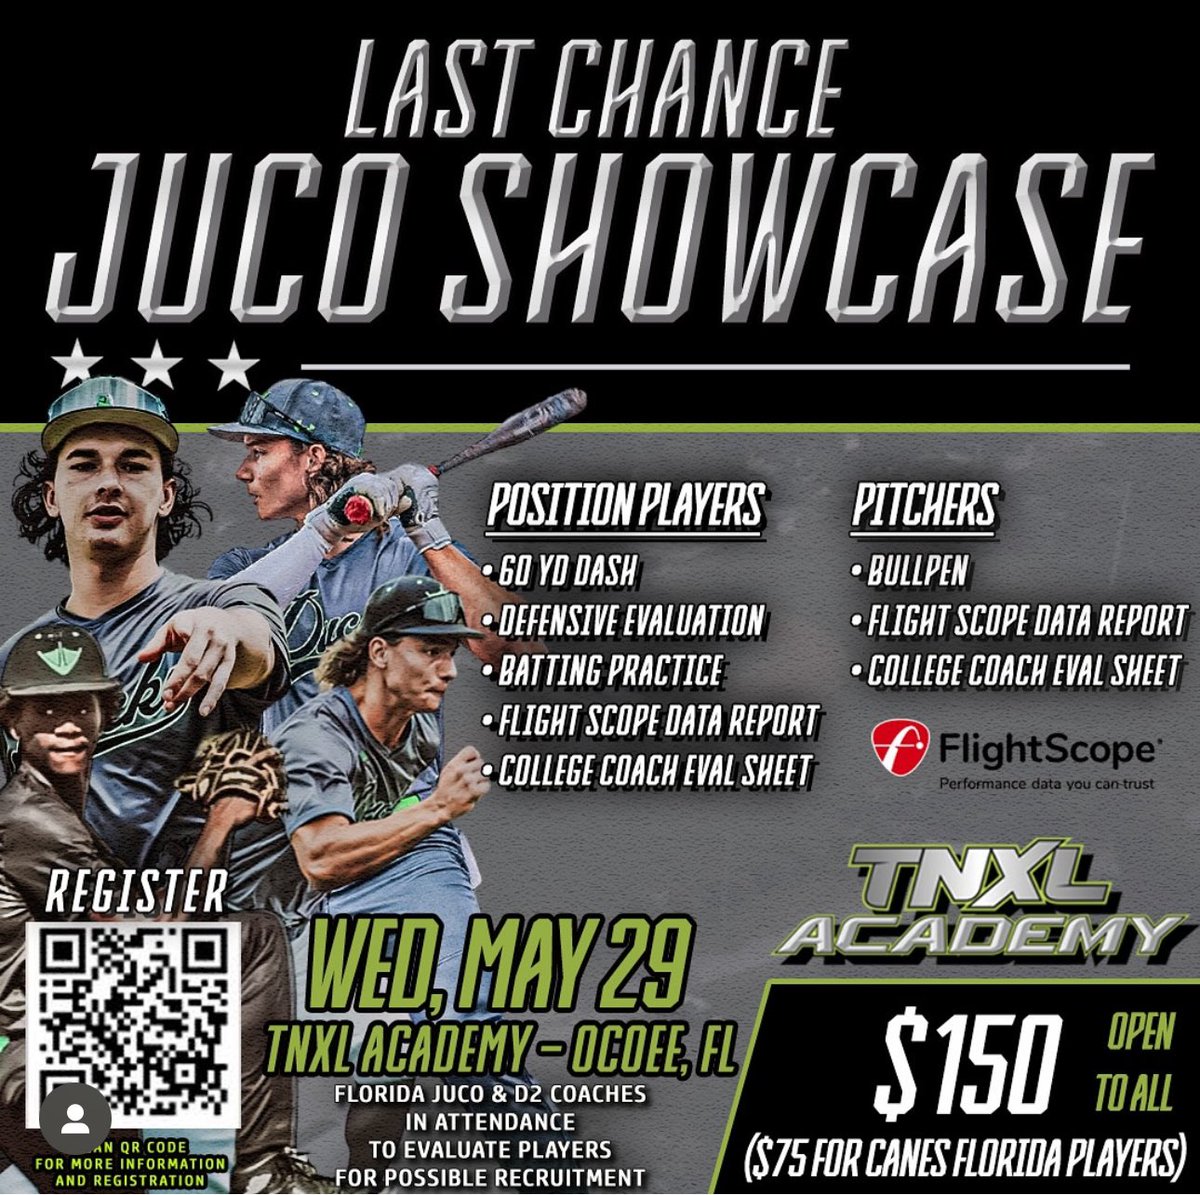 Next Wednesday! Be there to be seen in front of top notch JUCO and D2 coaches! More info and registration here:

forms.gle/6Fo532VTExgxwX…

#jucobaseball #recruitment #D2baseball #floridabaseball